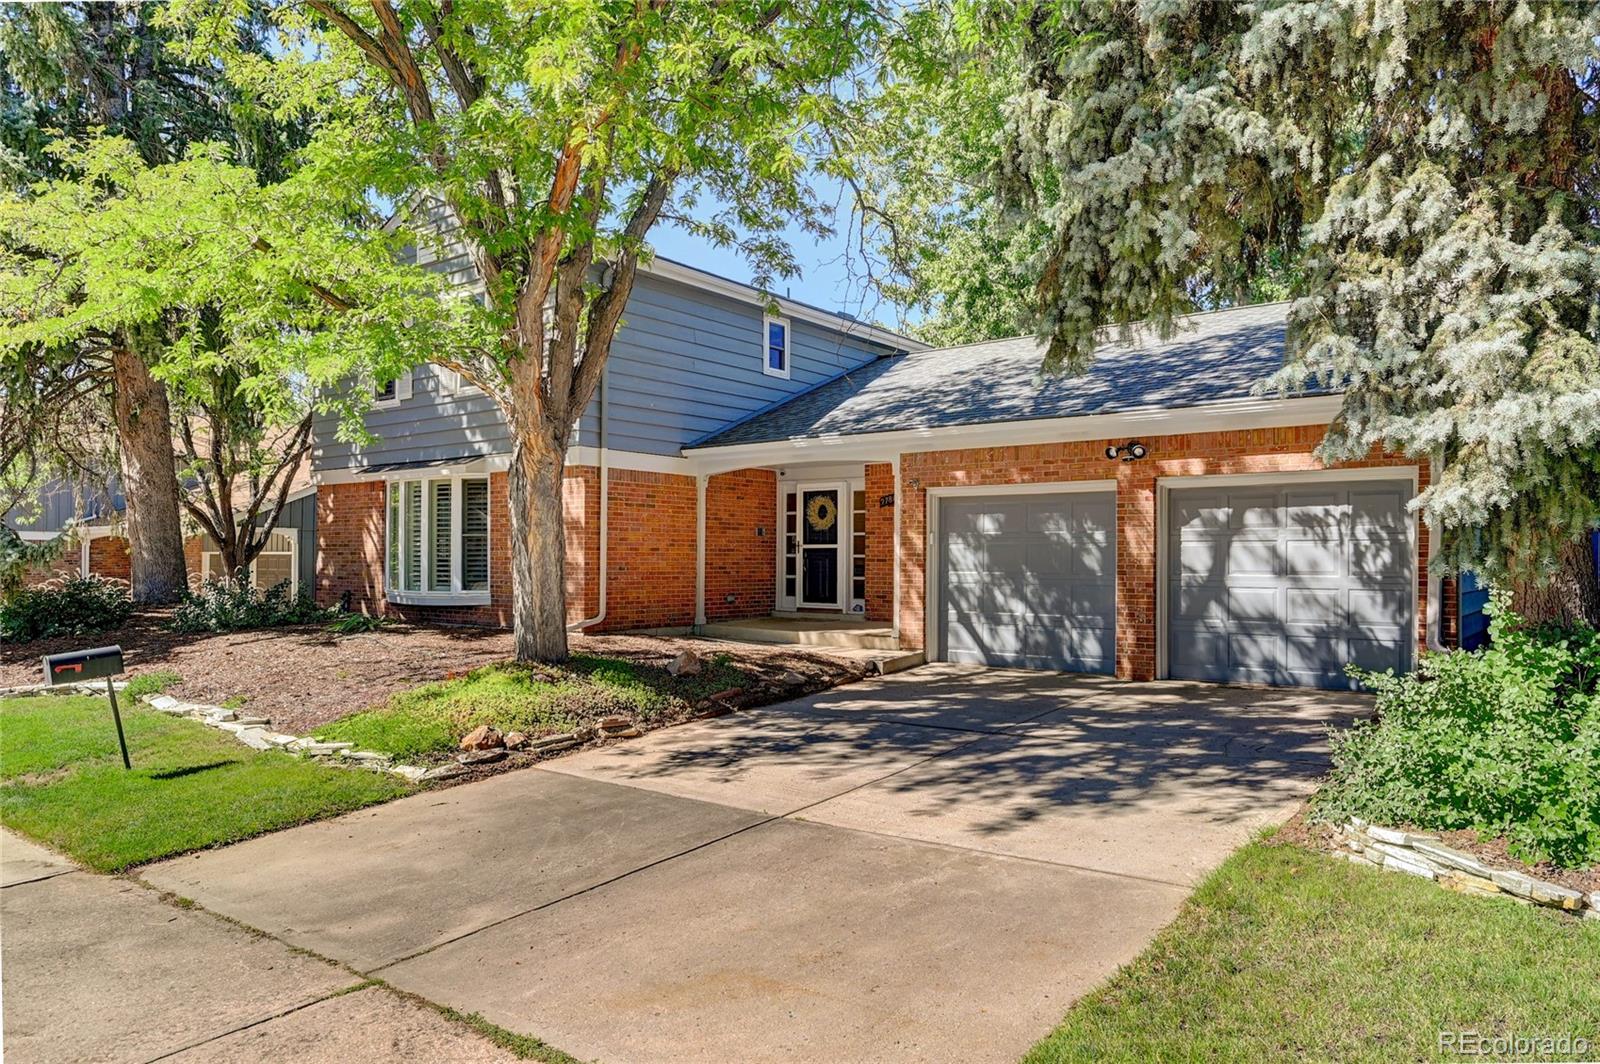 2781 s macon circle, Aurora sold home. Closed on 2023-10-31 for $650,000.